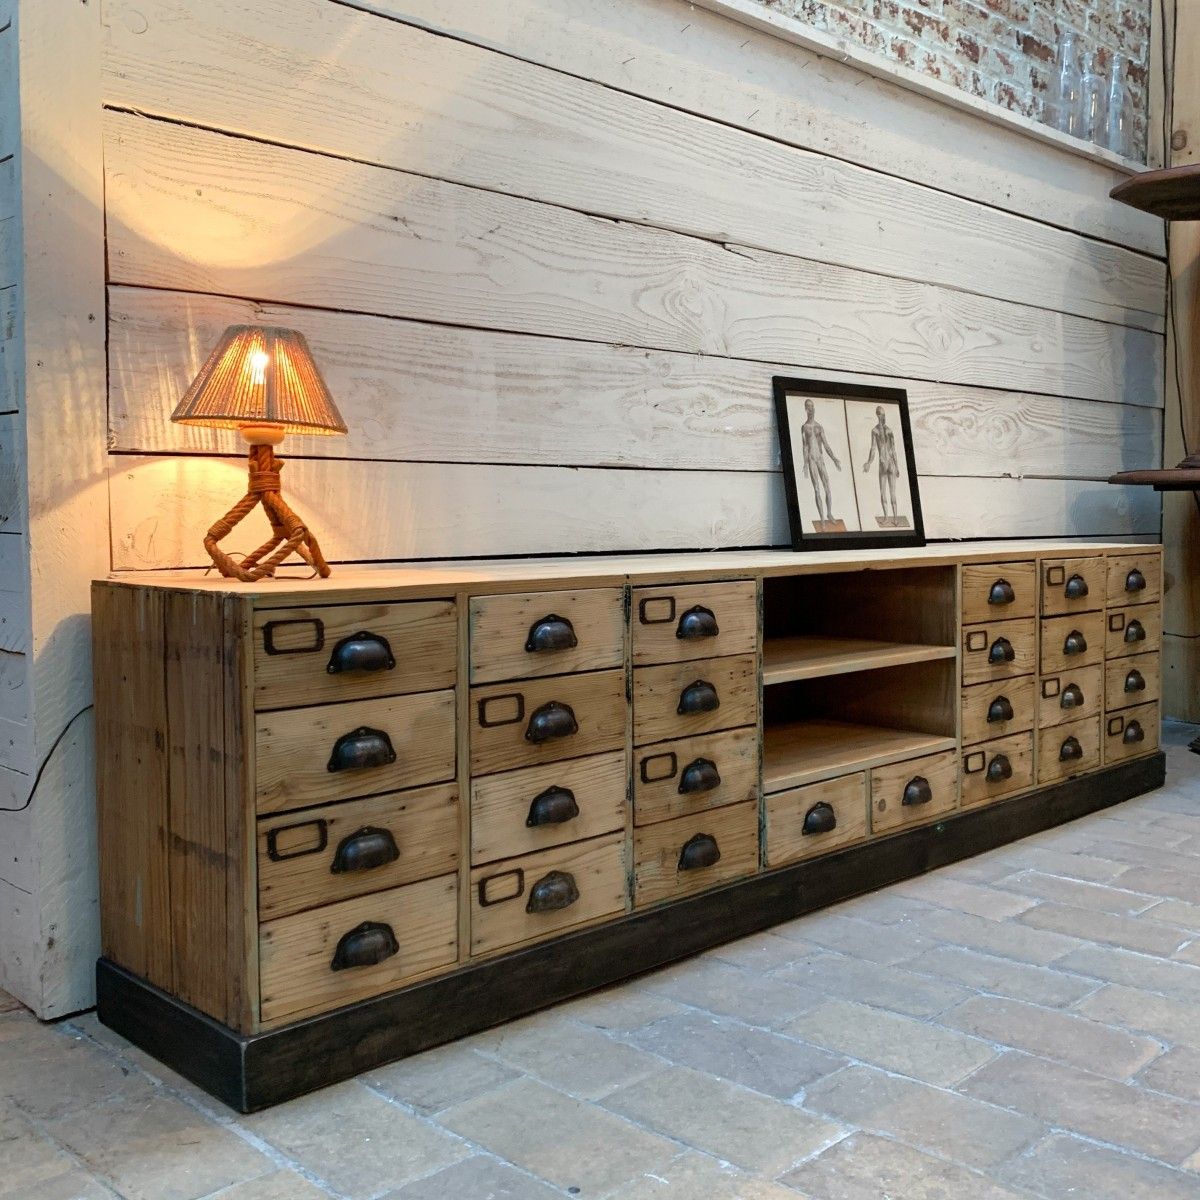 Low Wooden Cabinet With Drawers Within Wood Cabinet With Drawers (View 9 of 15)